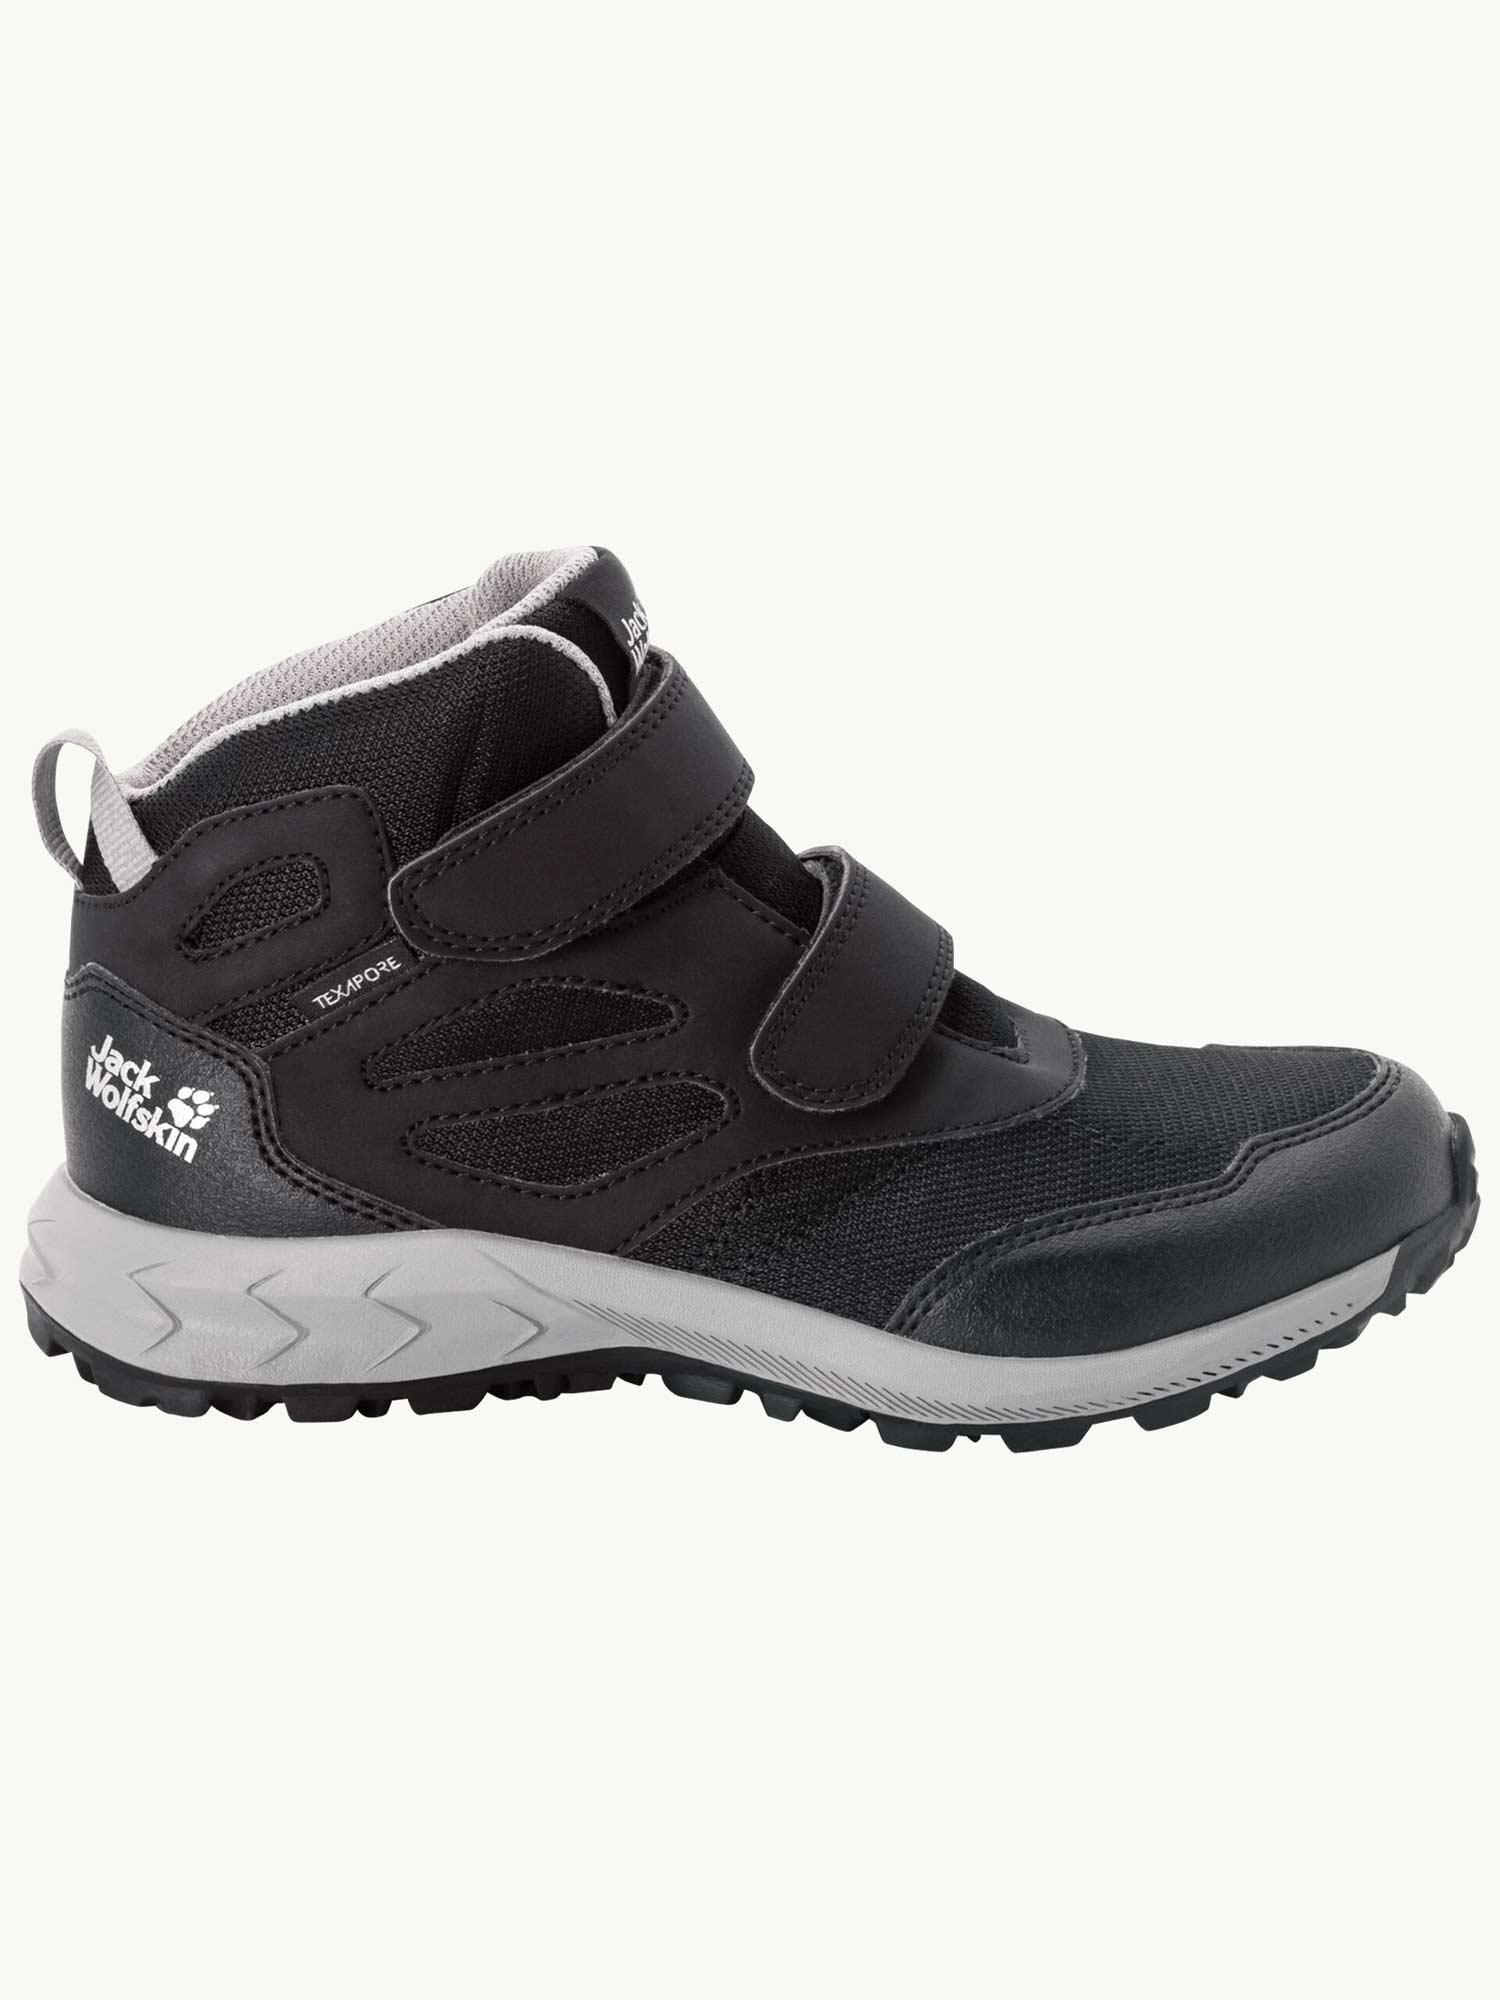 Selected image for JACK WOLFSKIN Dečije cipele WOODLAND TEXAPORE MID VC K Hiking shoes crne